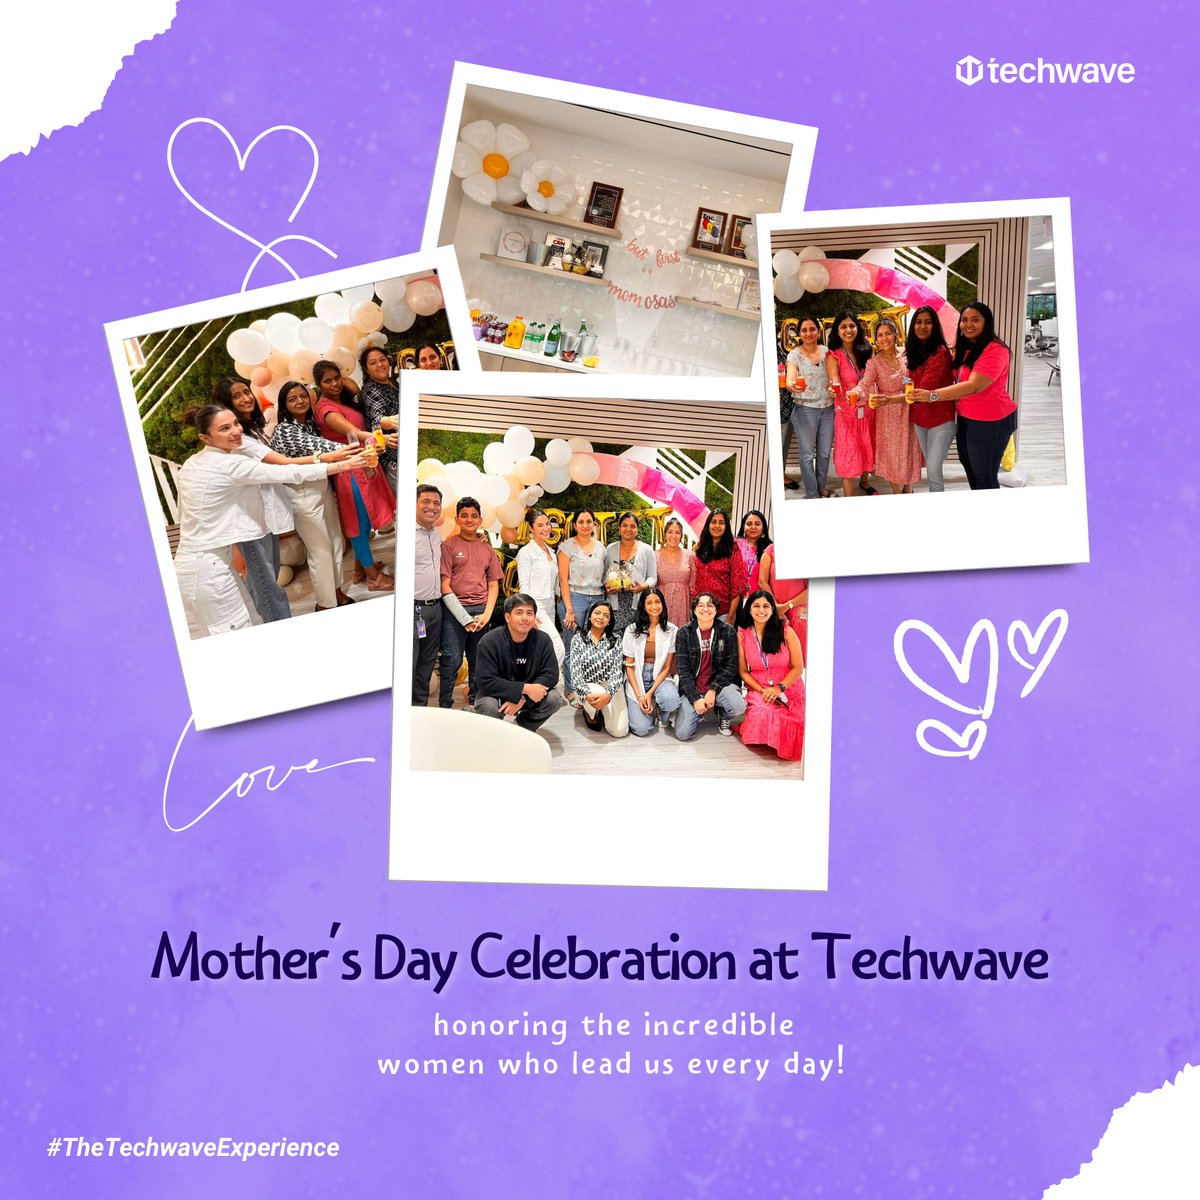 Celebrating Mother's Day at Techwave brought our community together to raise a toast to the amazing mothers among us! Here's to the extraordinary mothers who make our world brighter every day!

#TheTechwaveExperience #techwave #mothersday #MothersDayCelebration